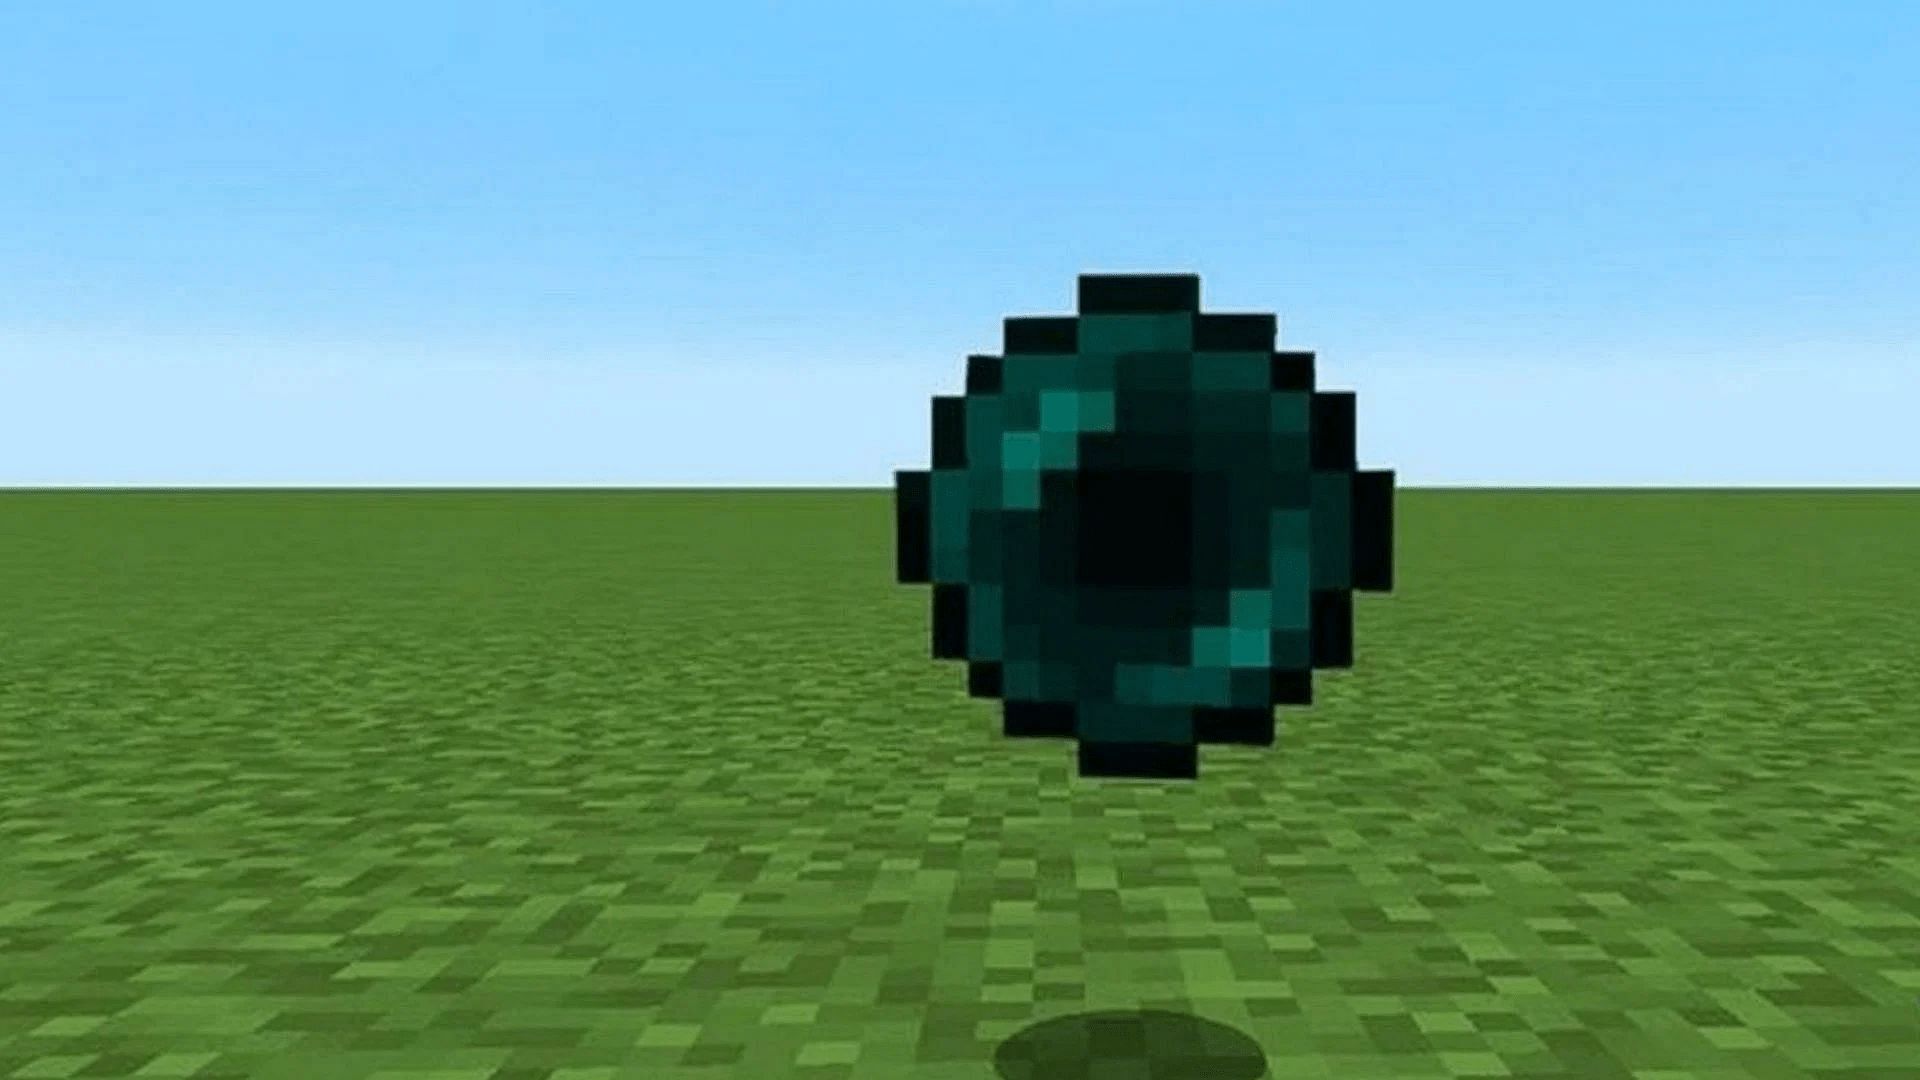 Ender pearls are incredibly helpful in many situations past creating Eyes of Ender (Image via Mojang)